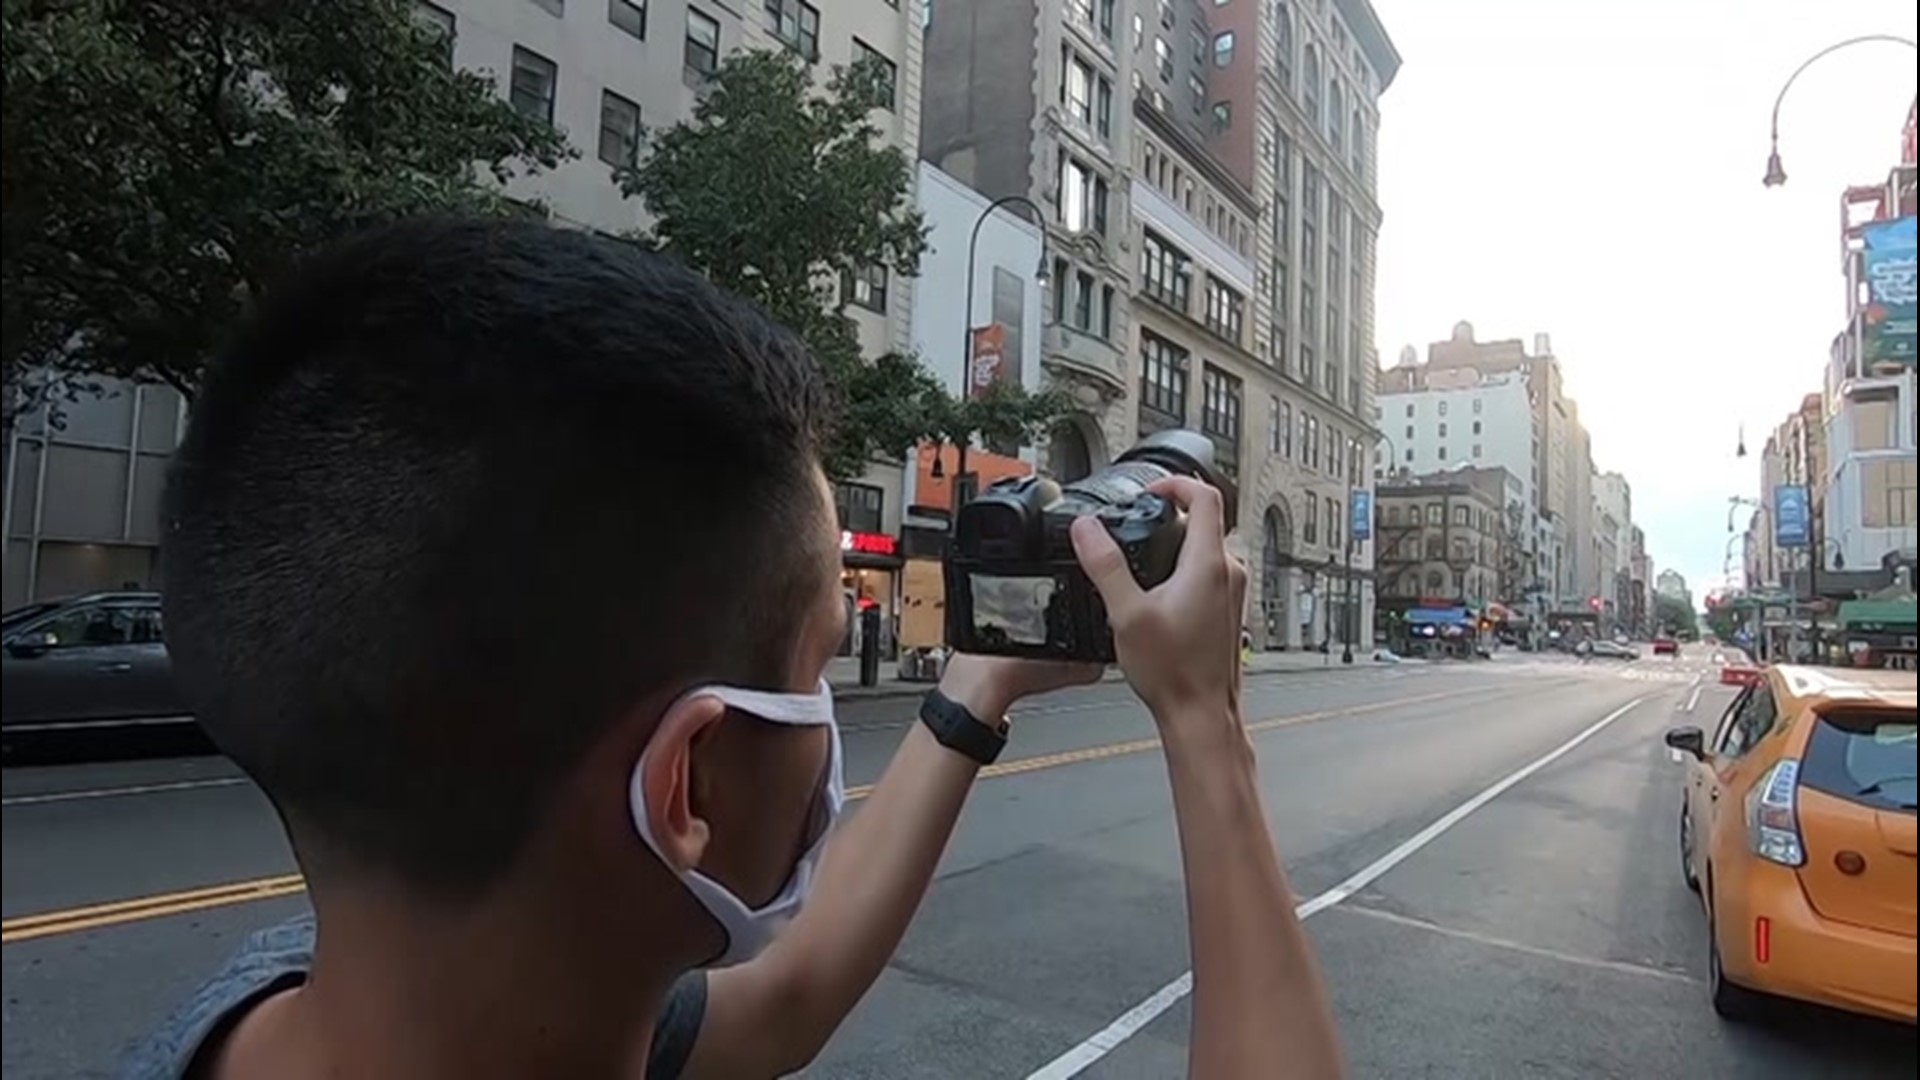 AccuWeather's Dexter Henry caught up with a photographer to discuss how weather impacts getting the perfect snapshot of Manhattanhenge.